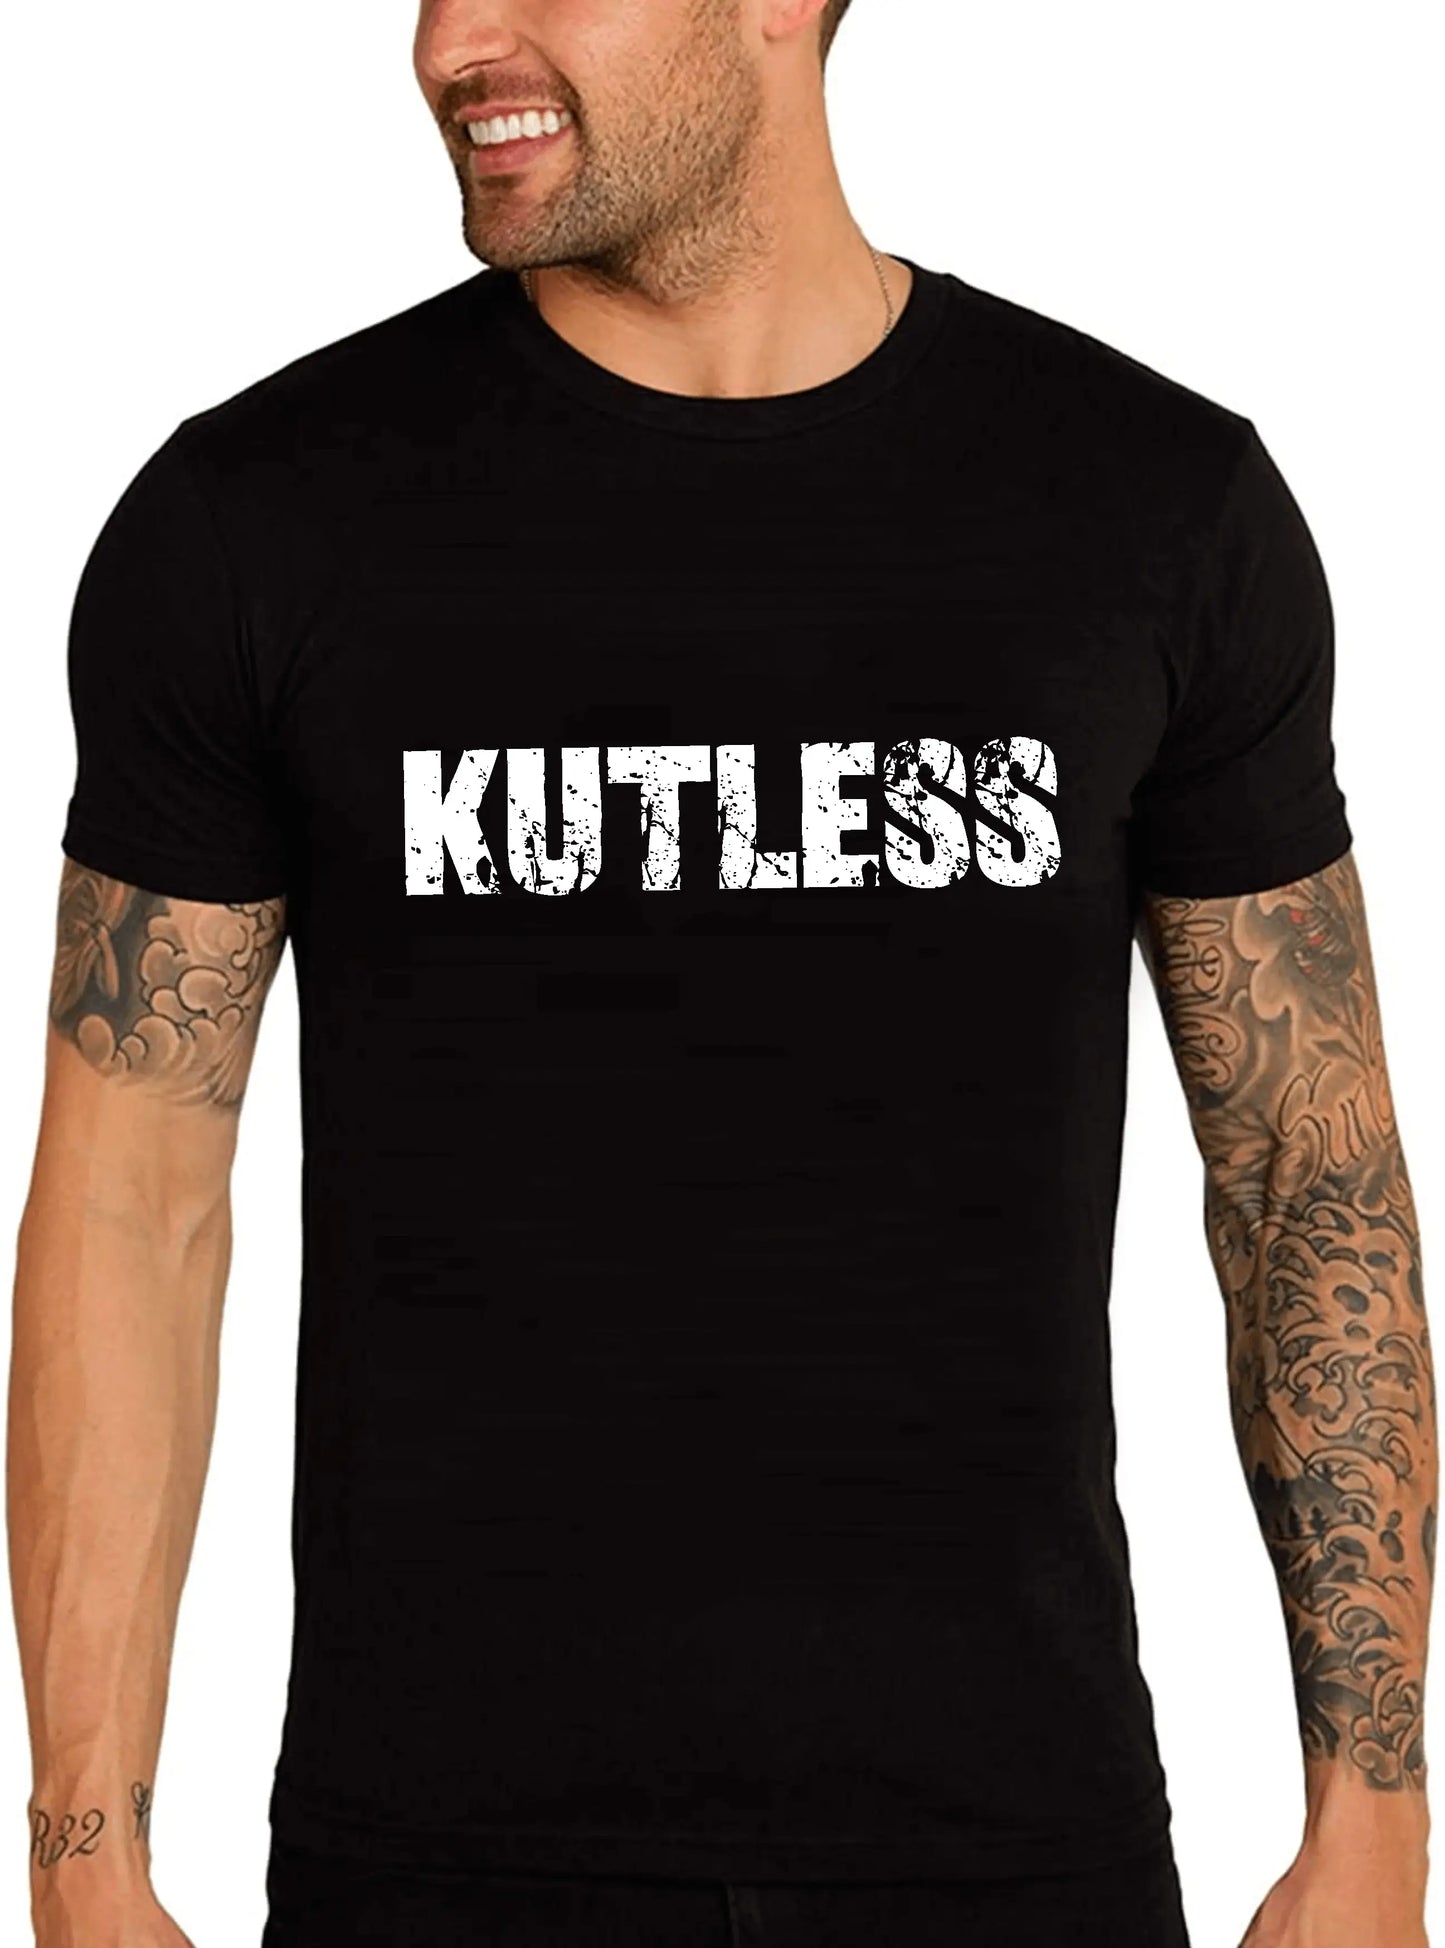 Men's Graphic T-Shirt Kutless Eco-Friendly Limited Edition Short Sleeve Tee-Shirt Vintage Birthday Gift Novelty